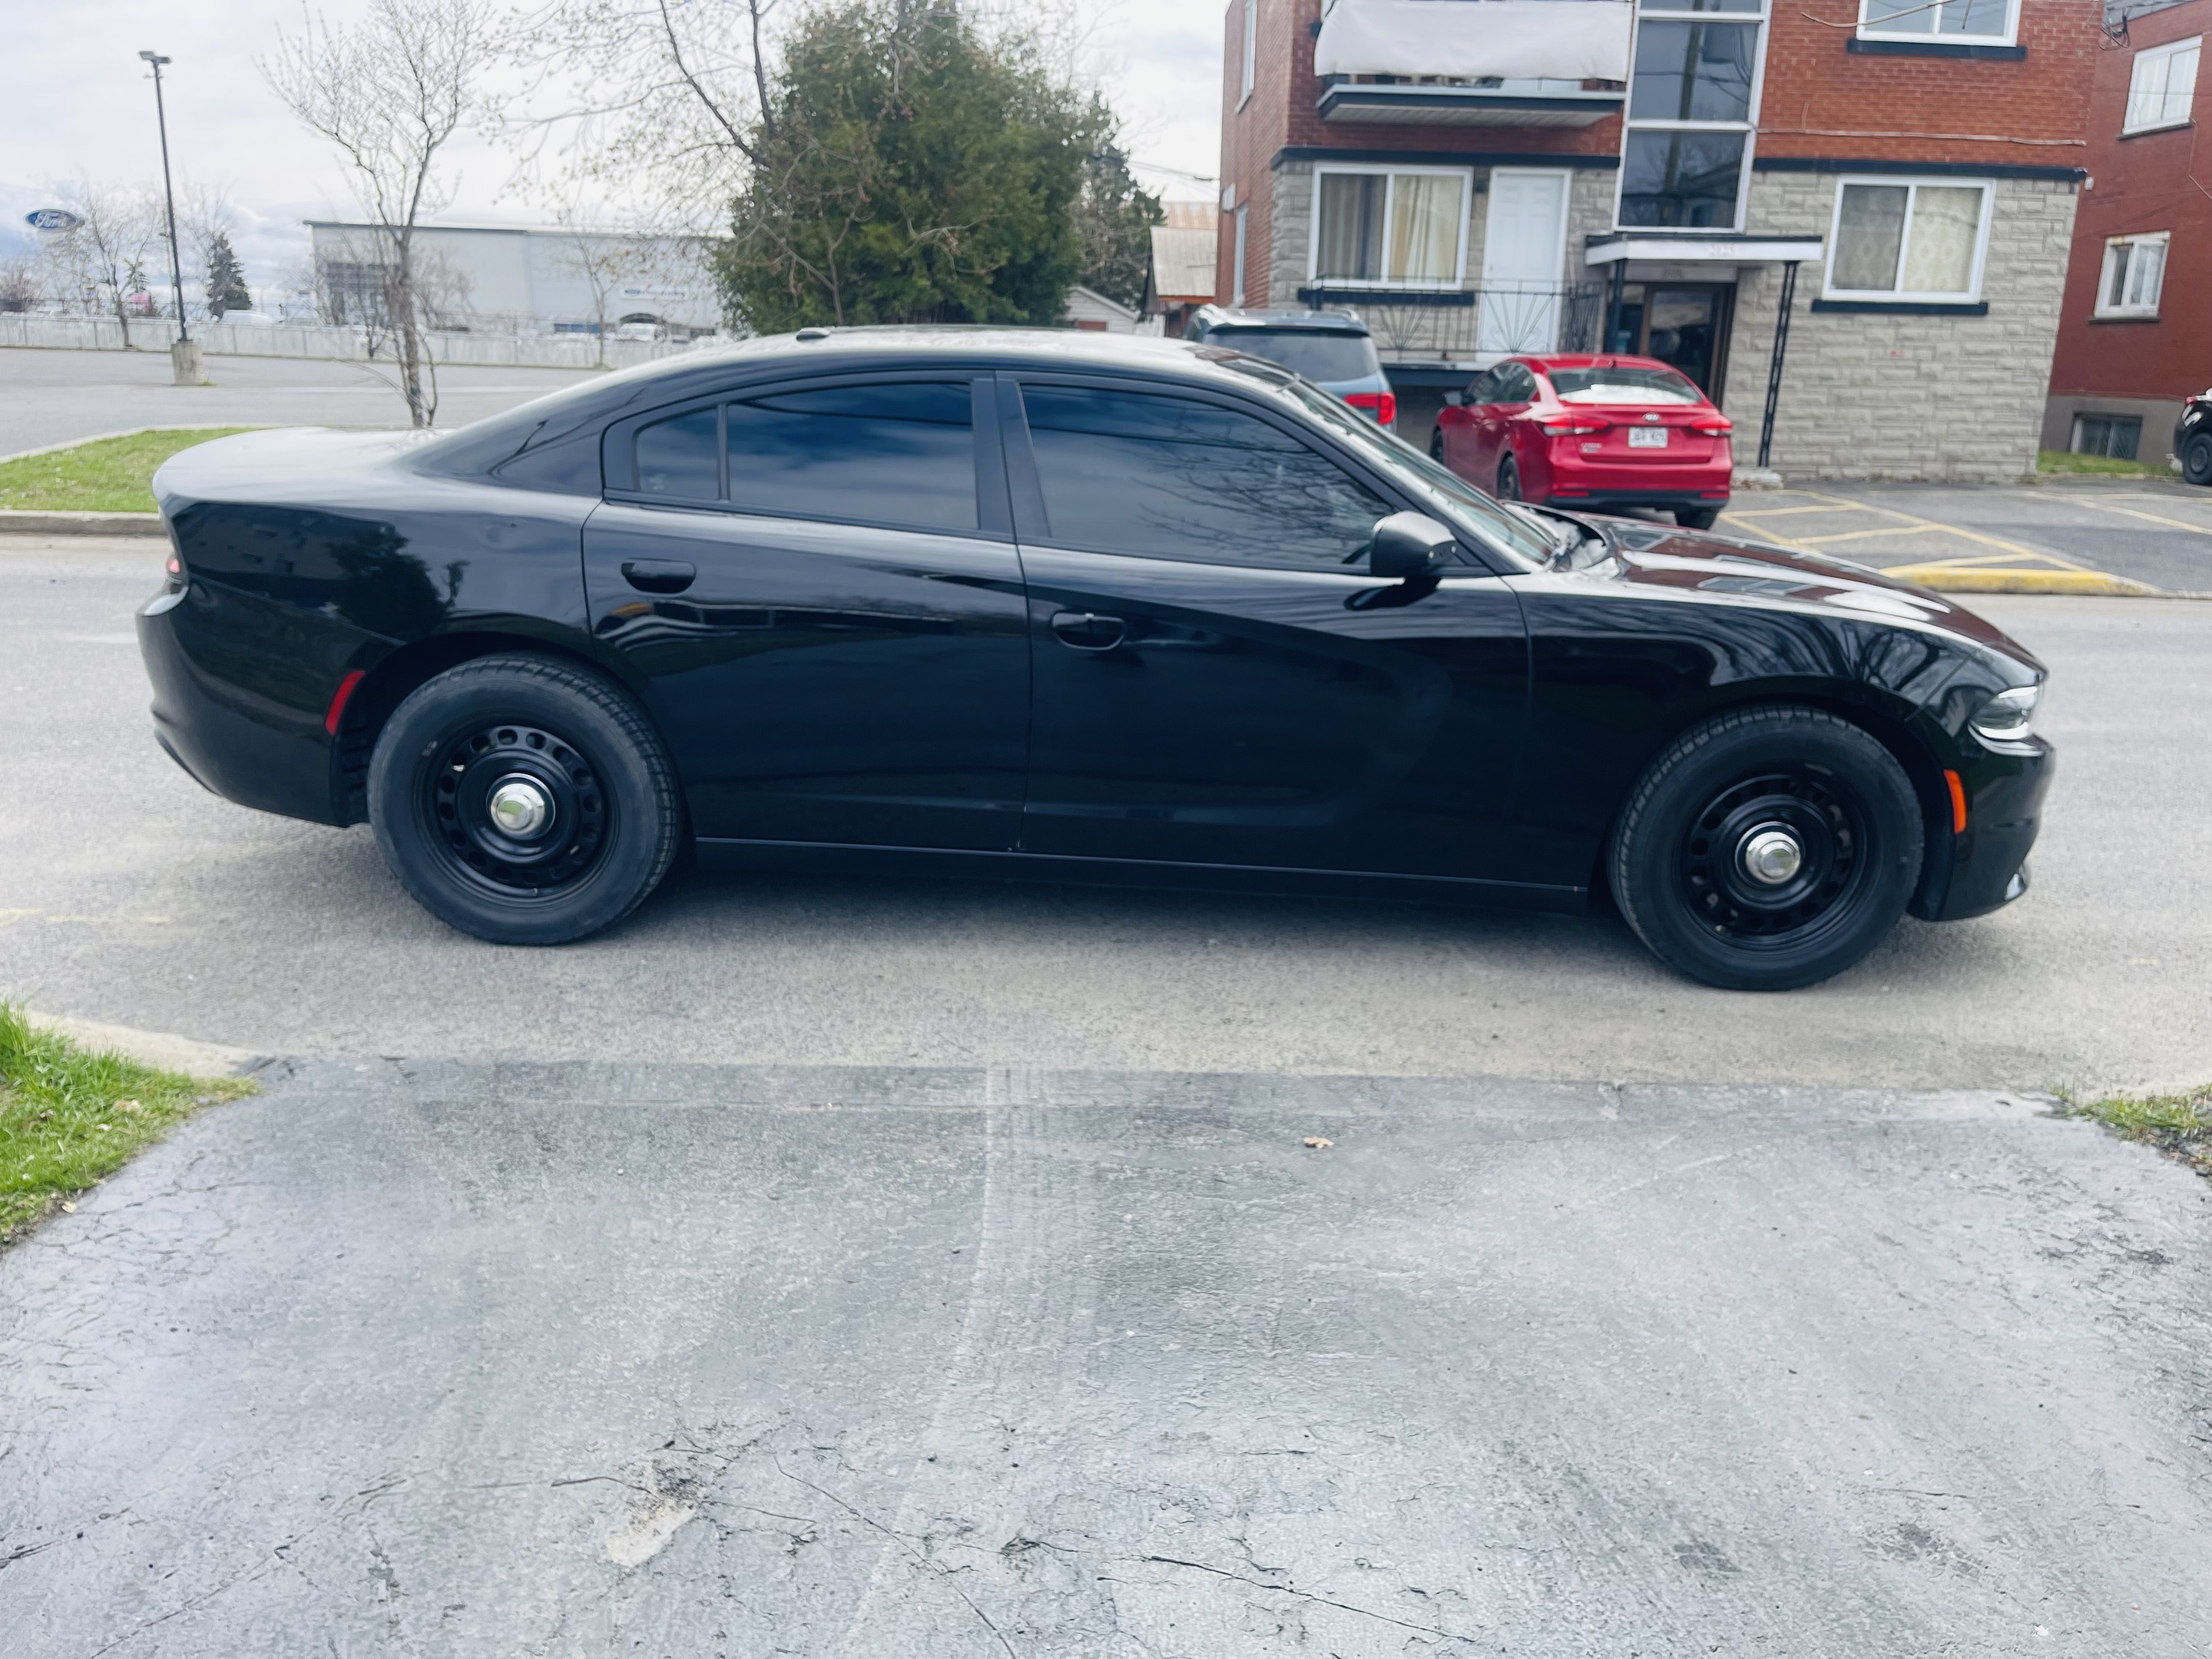 2016 Dodge Charger Police poursuit V8 awd